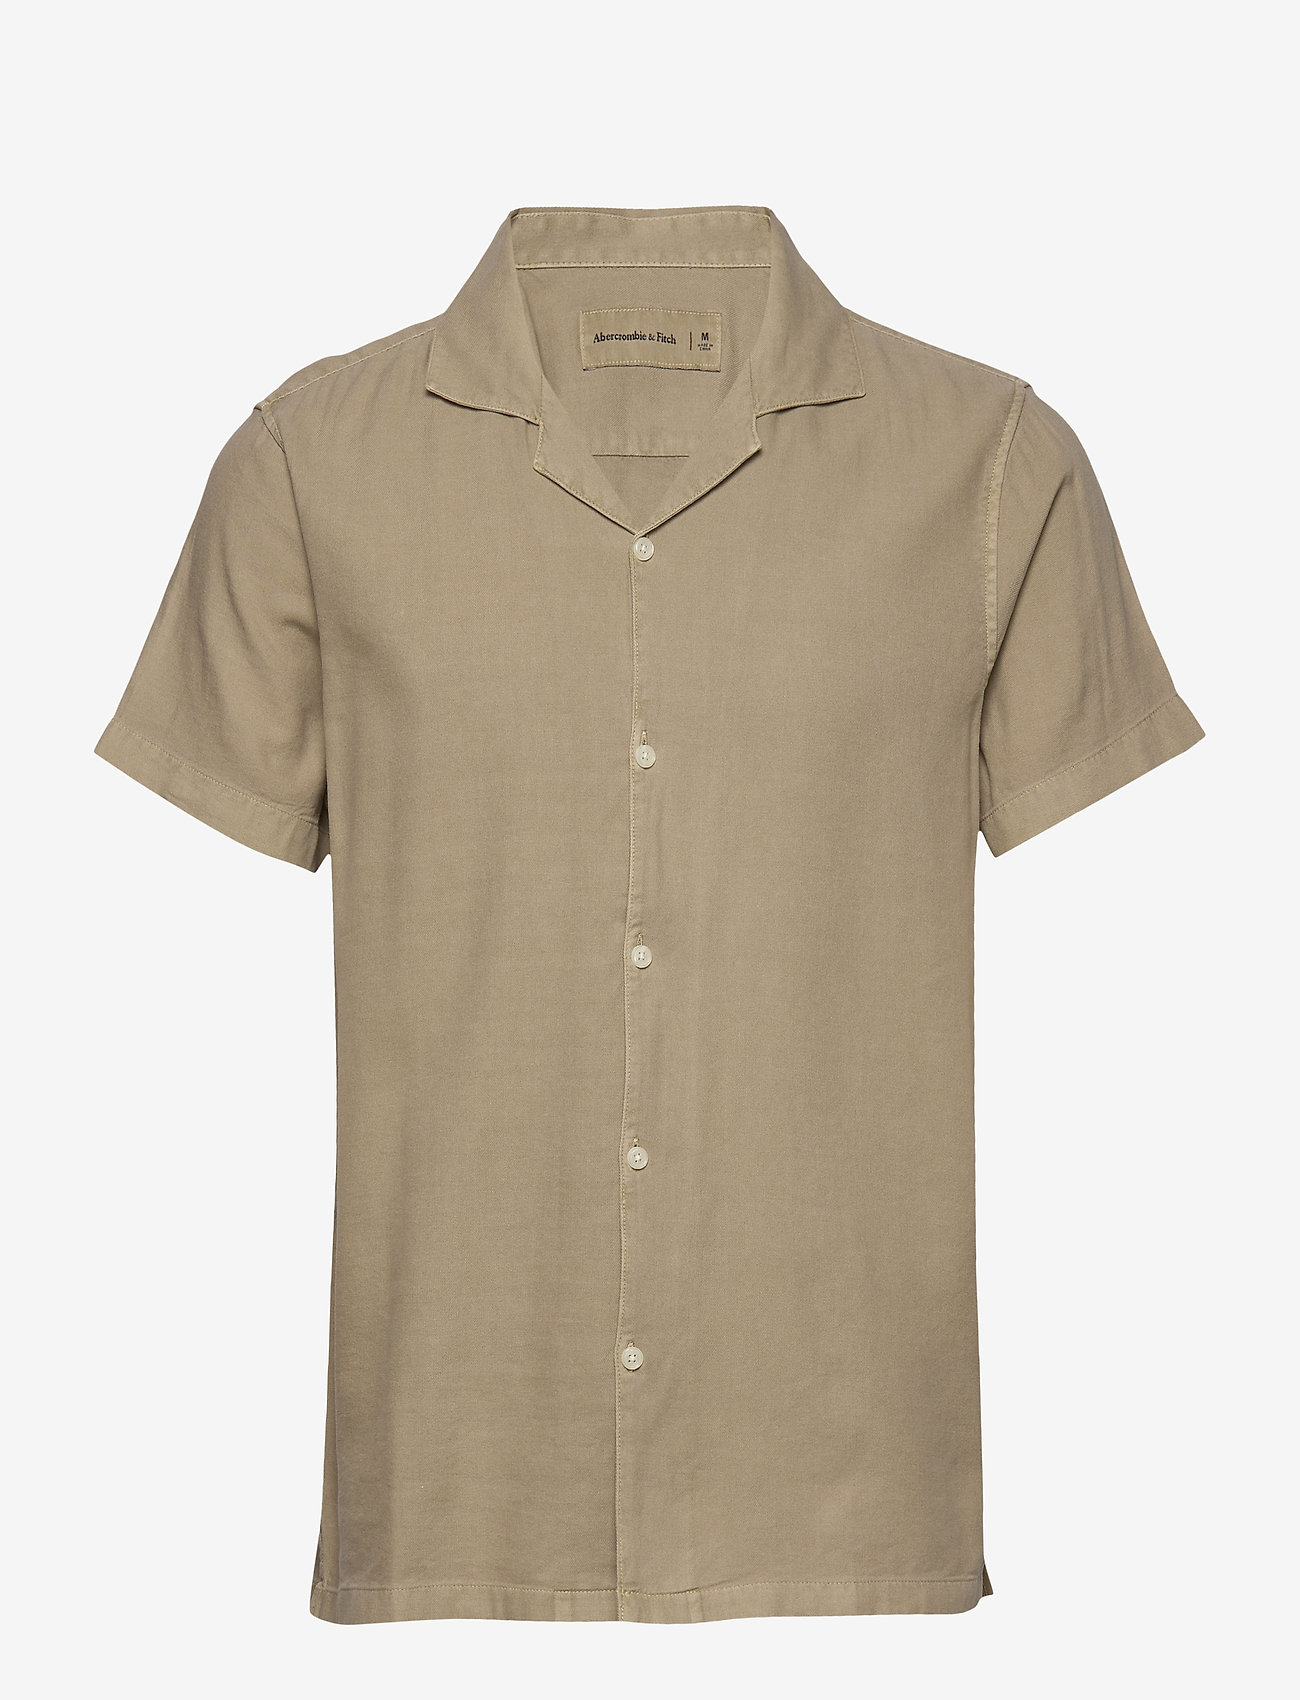 abercrombie and fitch resort shirt